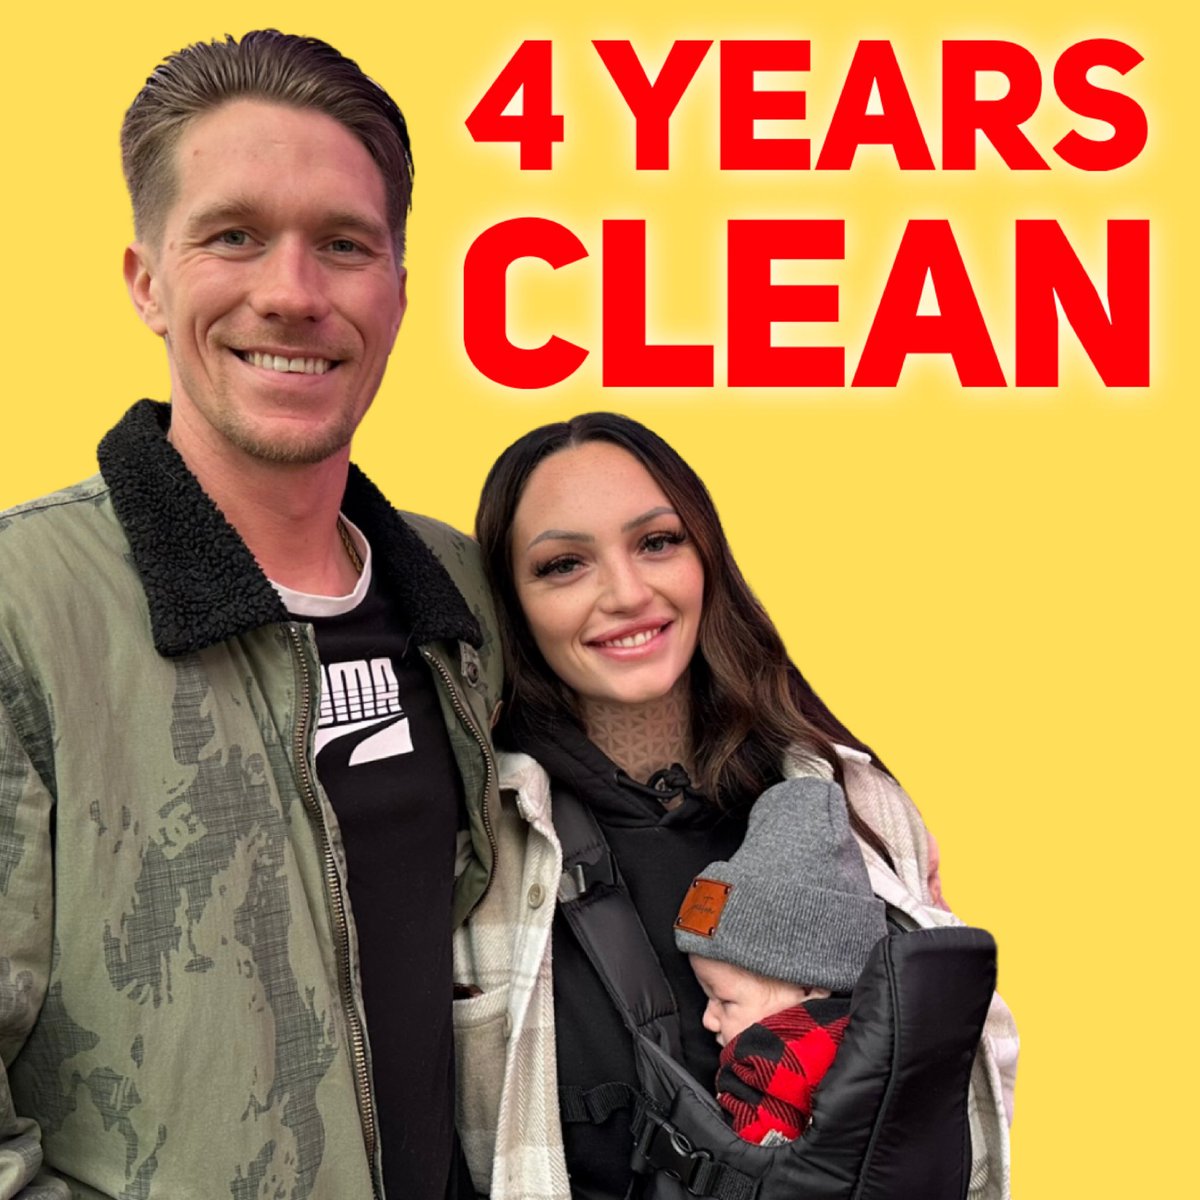 Way to go Dustin!! Yesterday was his 4 years clean! An incredible accomplishment, and now you are a present partner, father, family guy, and friend to so many. This is recovery. #WeDoRecover #NewWestRecovery